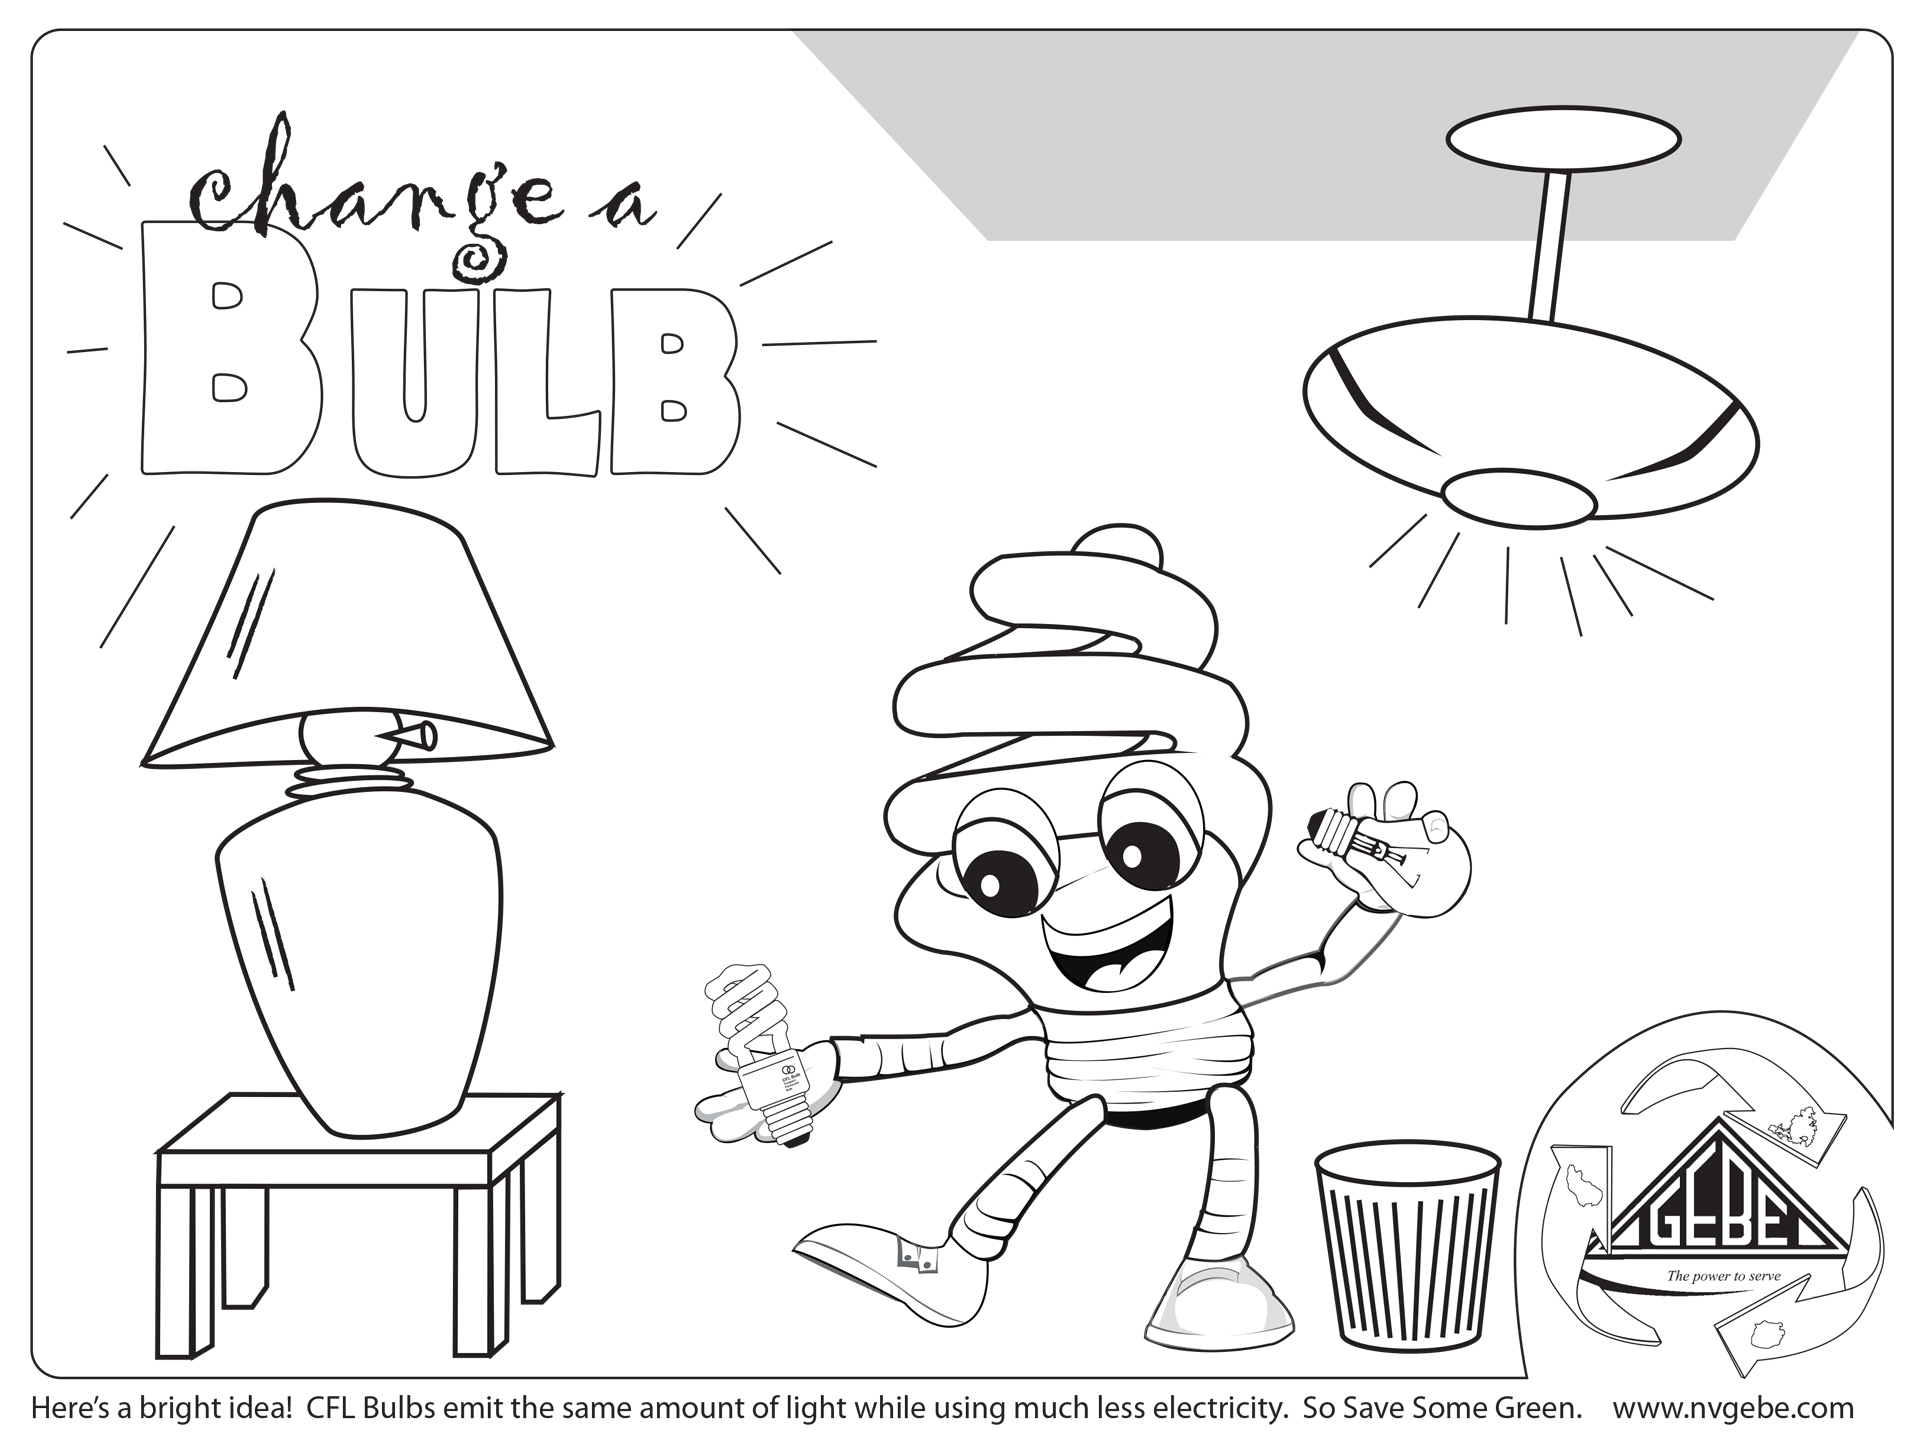 Save The Earth Coloring Pages Light Bulb To Save Earth Coloring Pages Free Printable Coloring Pages